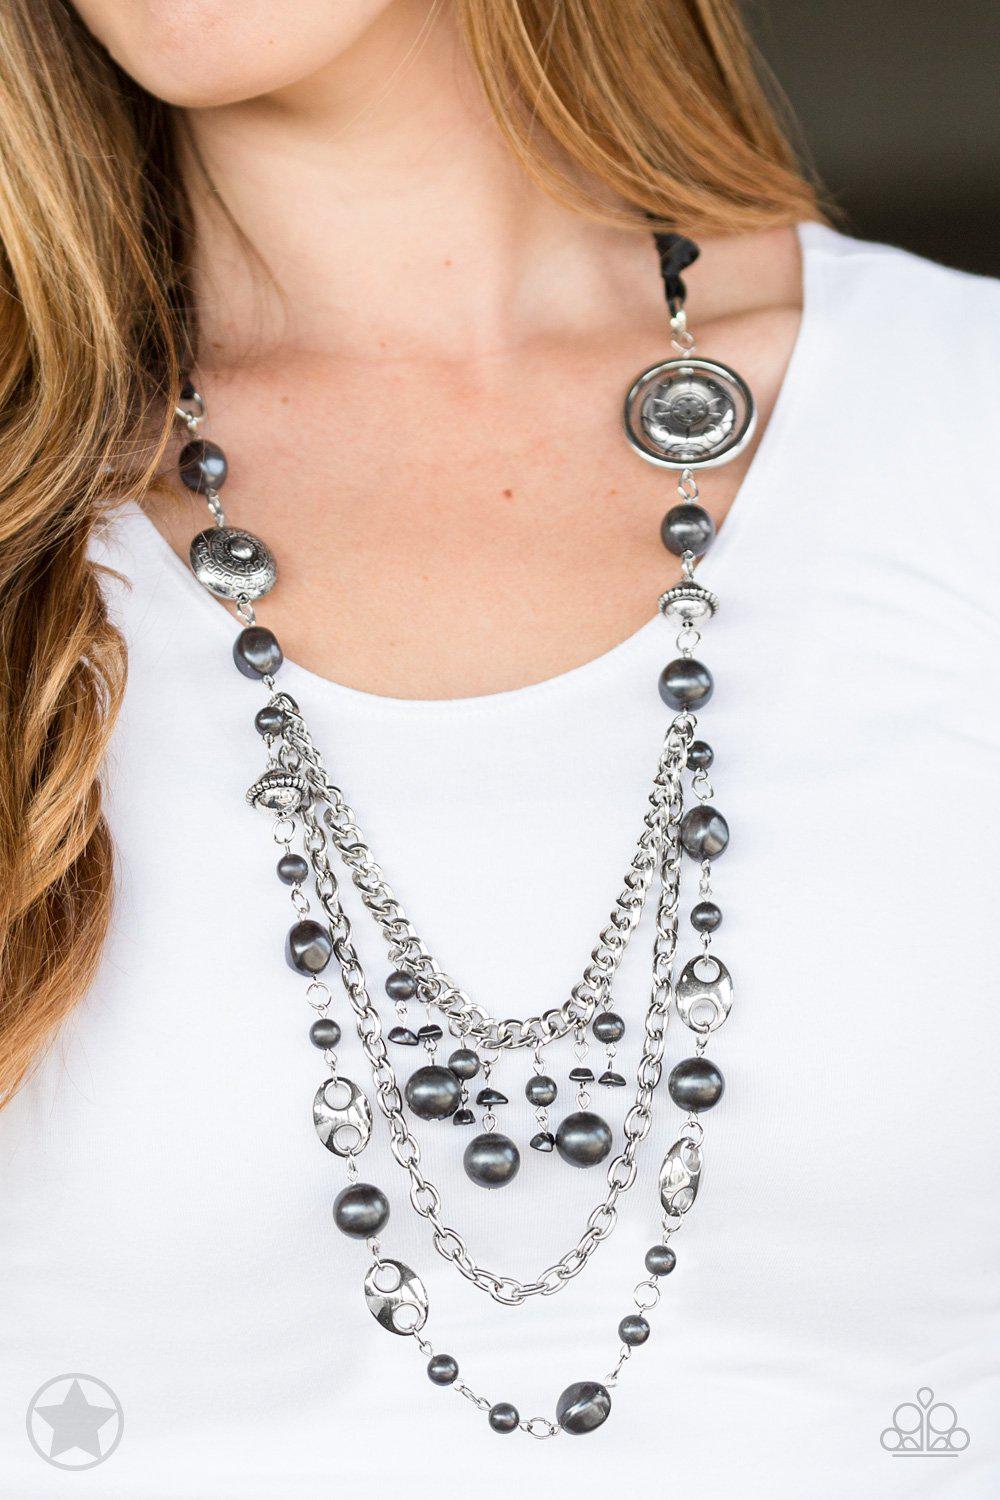 All The Trimmings Black Ribbon Necklace - Paparazzi Accessories-CarasShop.com - $5 Jewelry by Cara Jewels